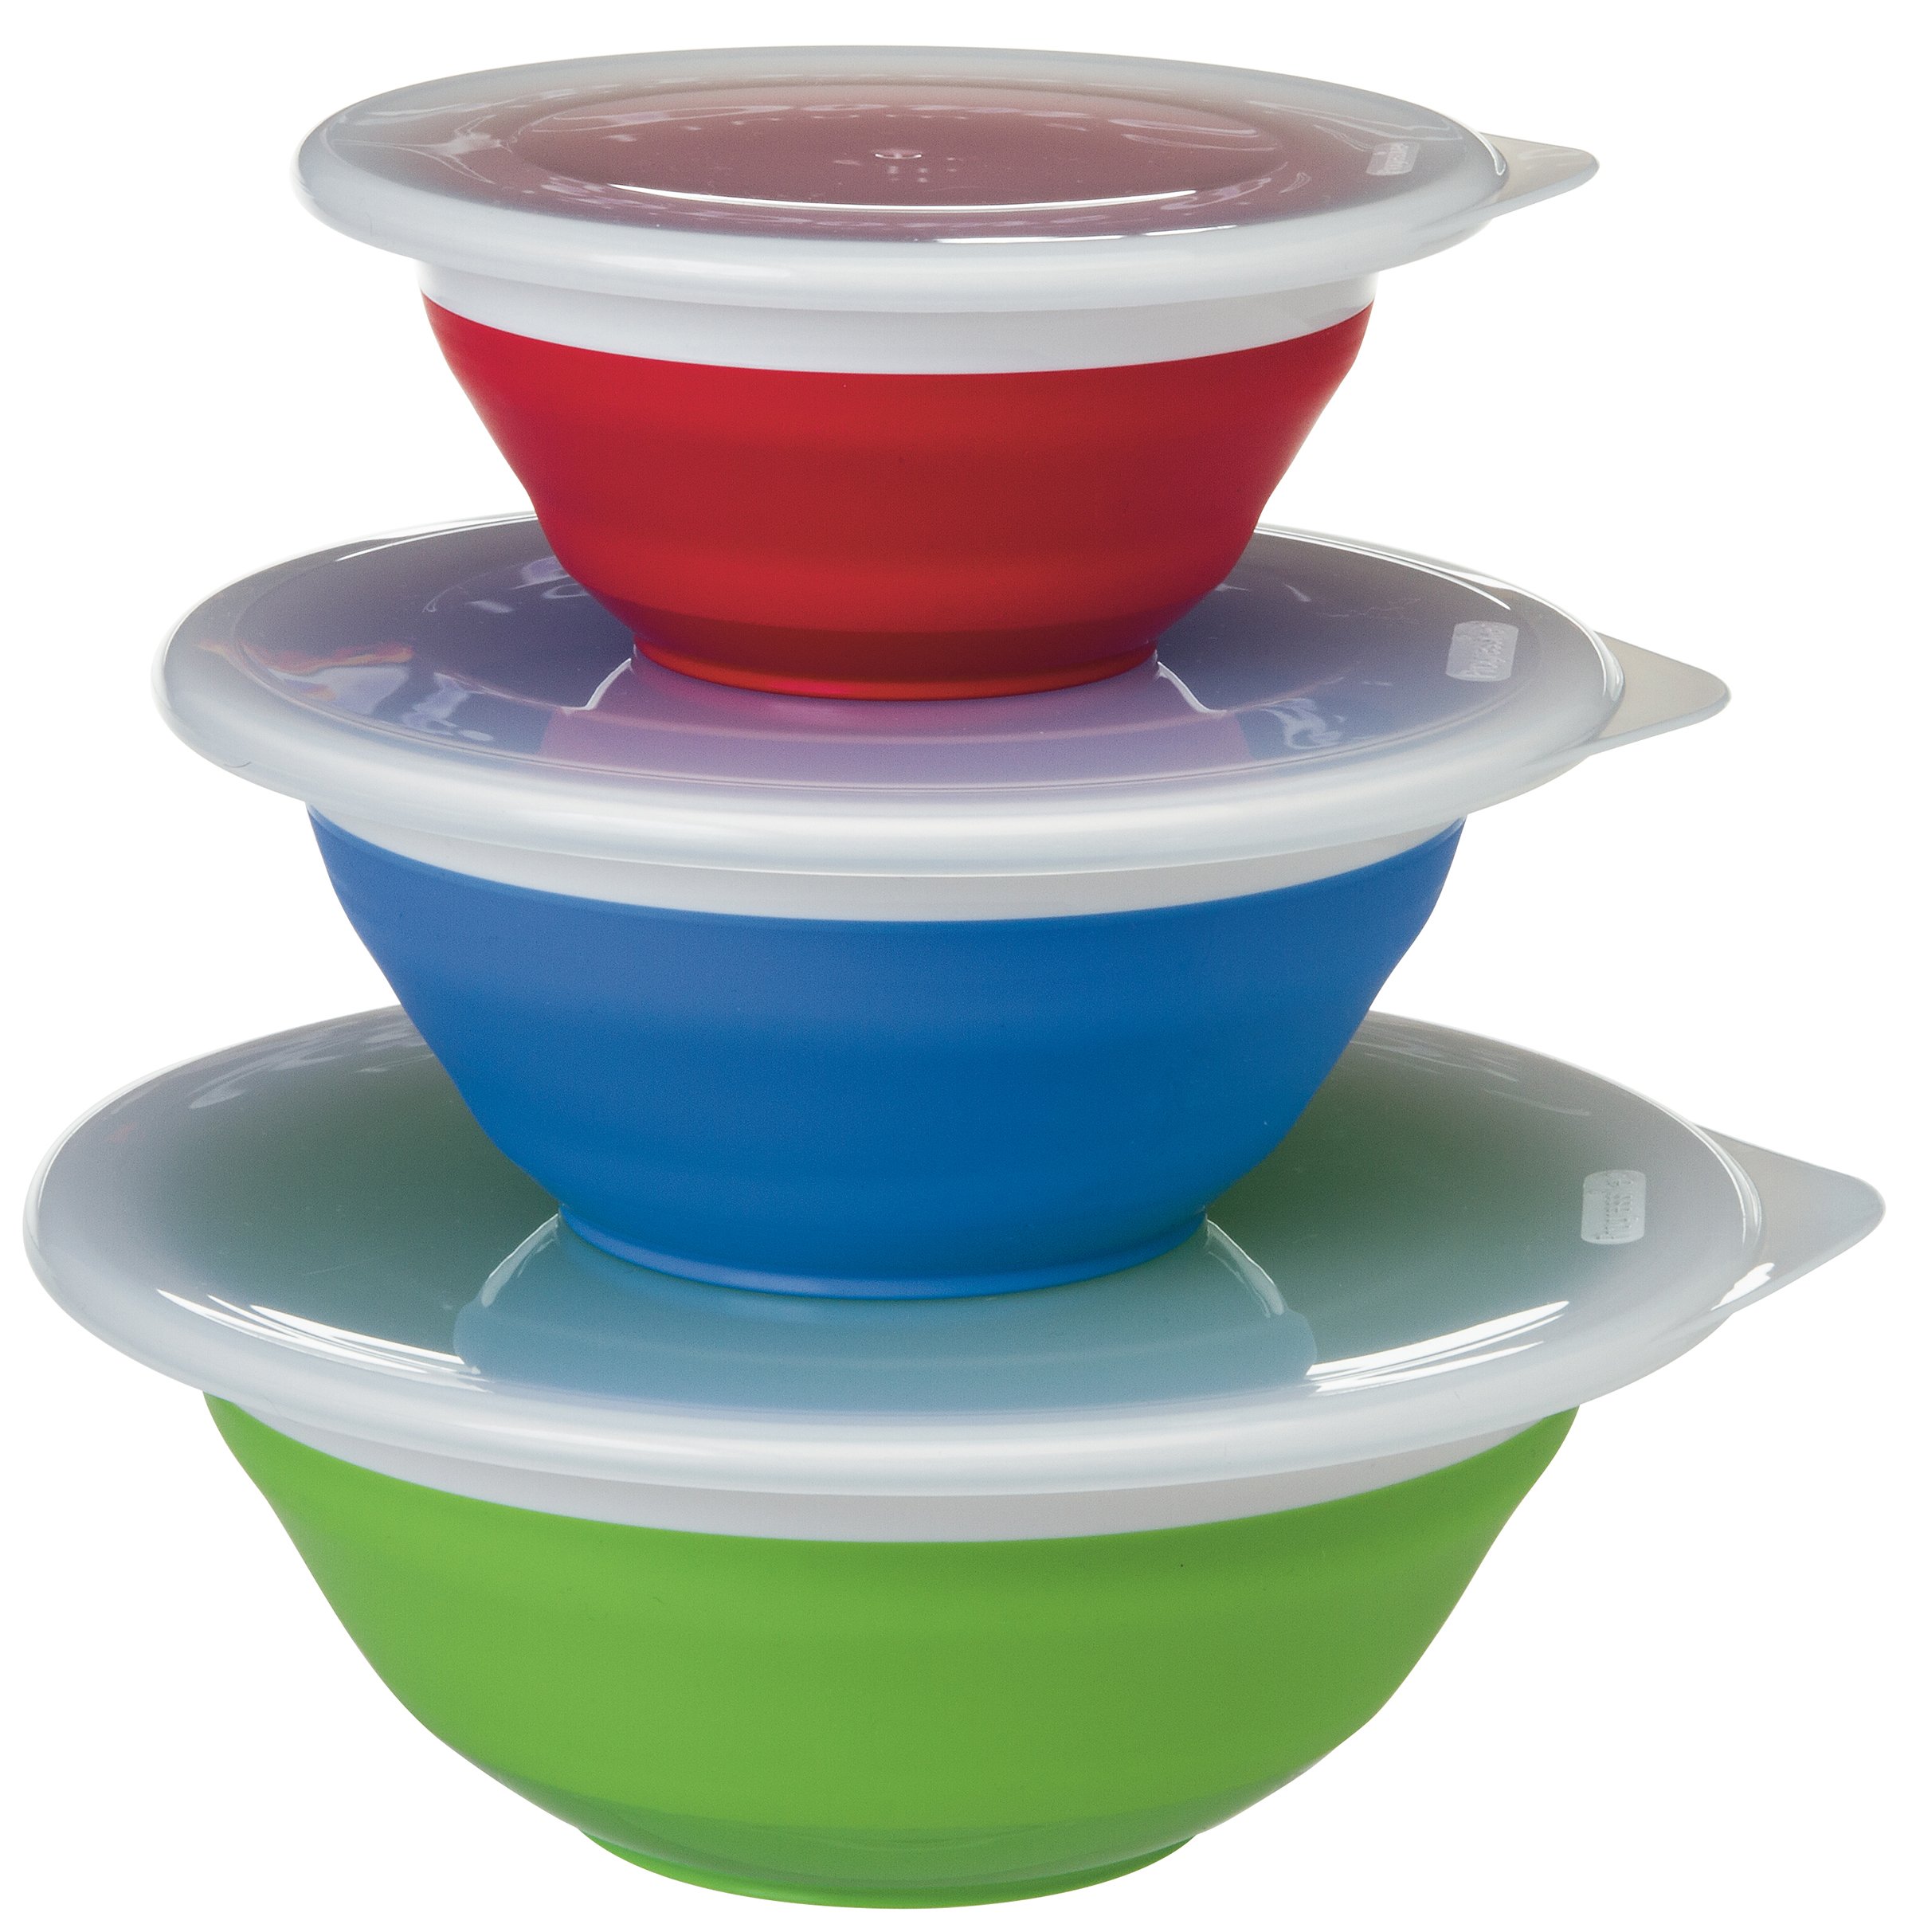 Progressive Prepworks Thinstore Collapsible Prep/Storage Bowls with Lids - Set of 3,Multicolored